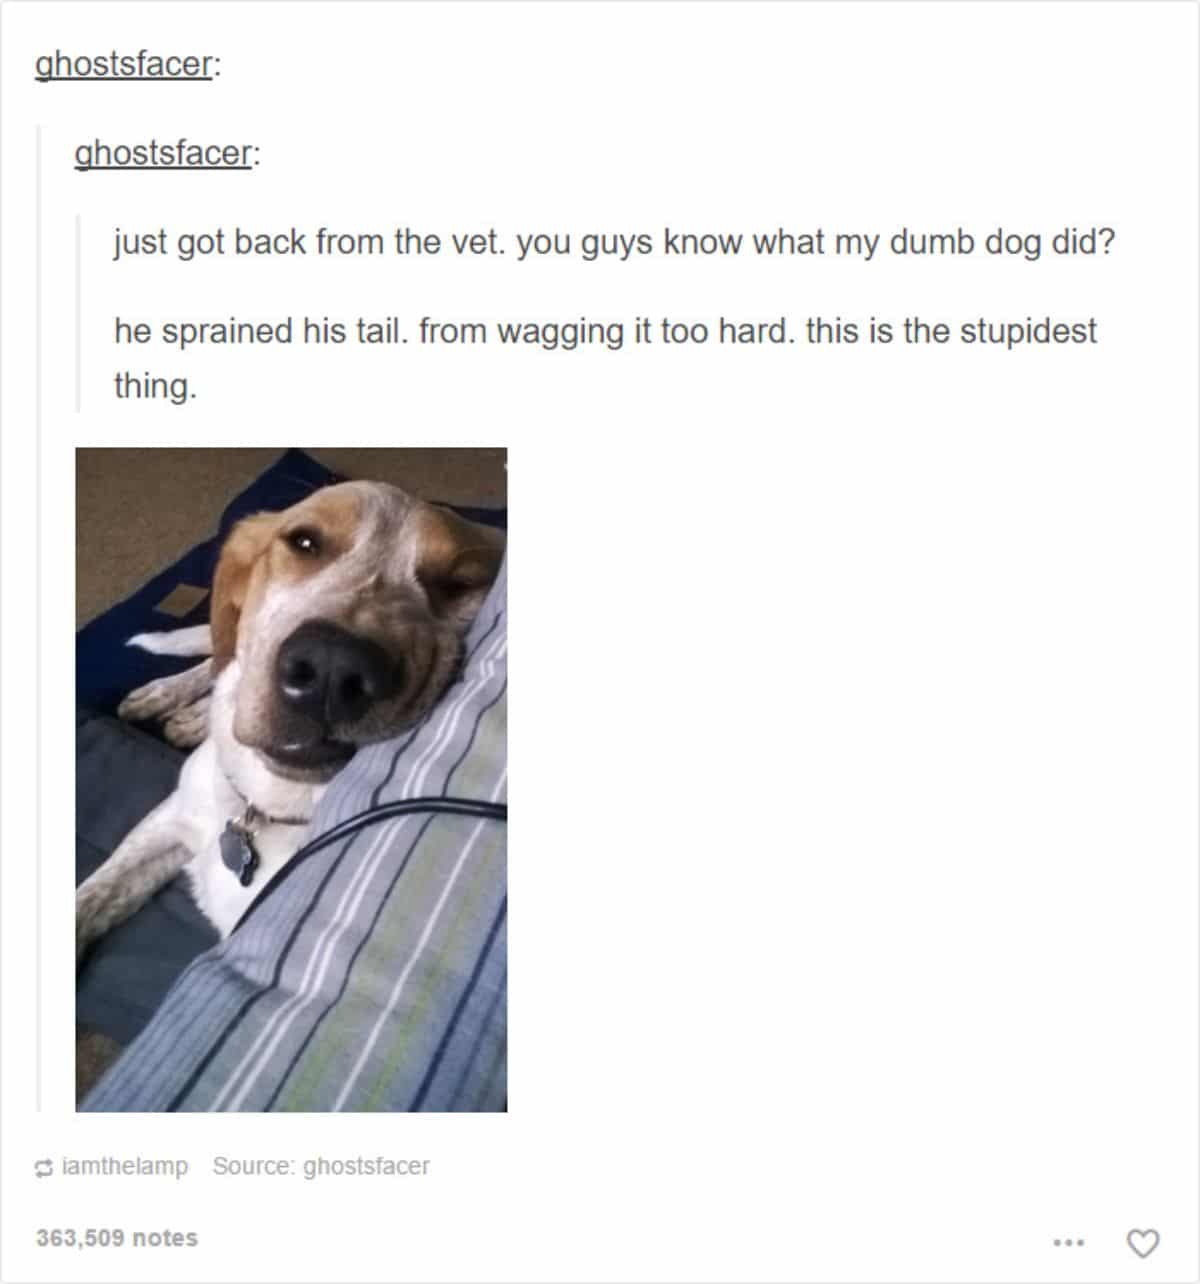 tumblr post of brown and white dog saying the dog sprained his tail from wagging it too hard